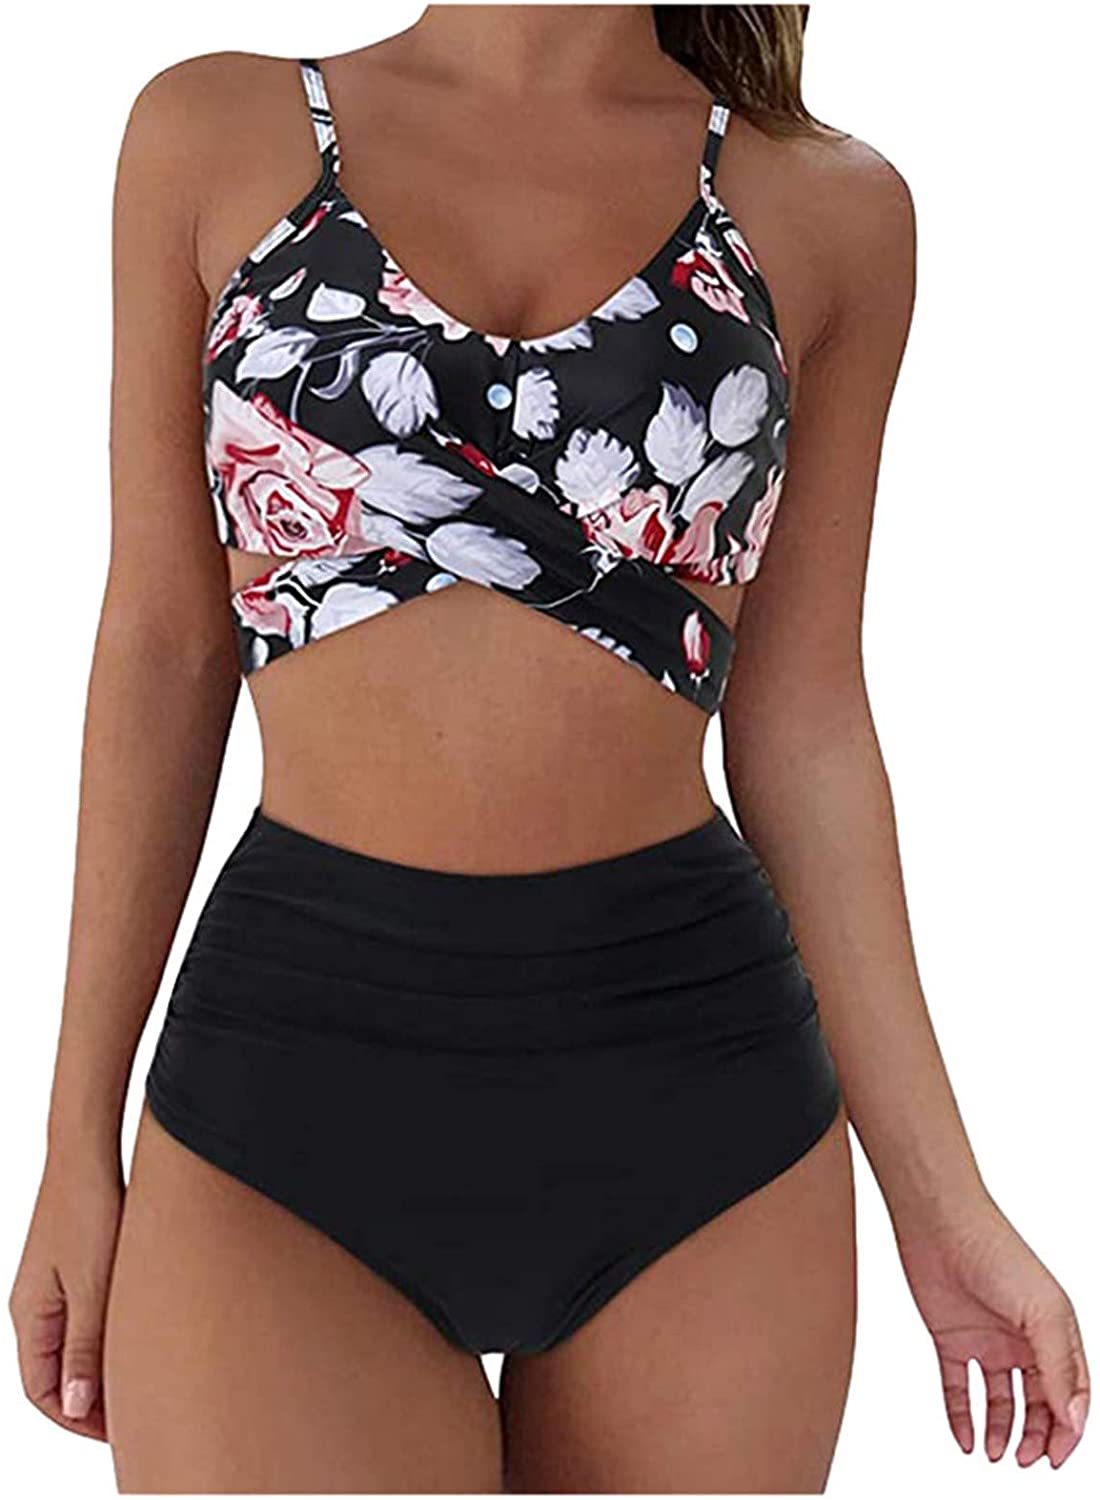 NXY summer Women's Swimsuit High Waisted Swimsuits Push Up Two Piece Bandage Cross Athletic Bathing Suits